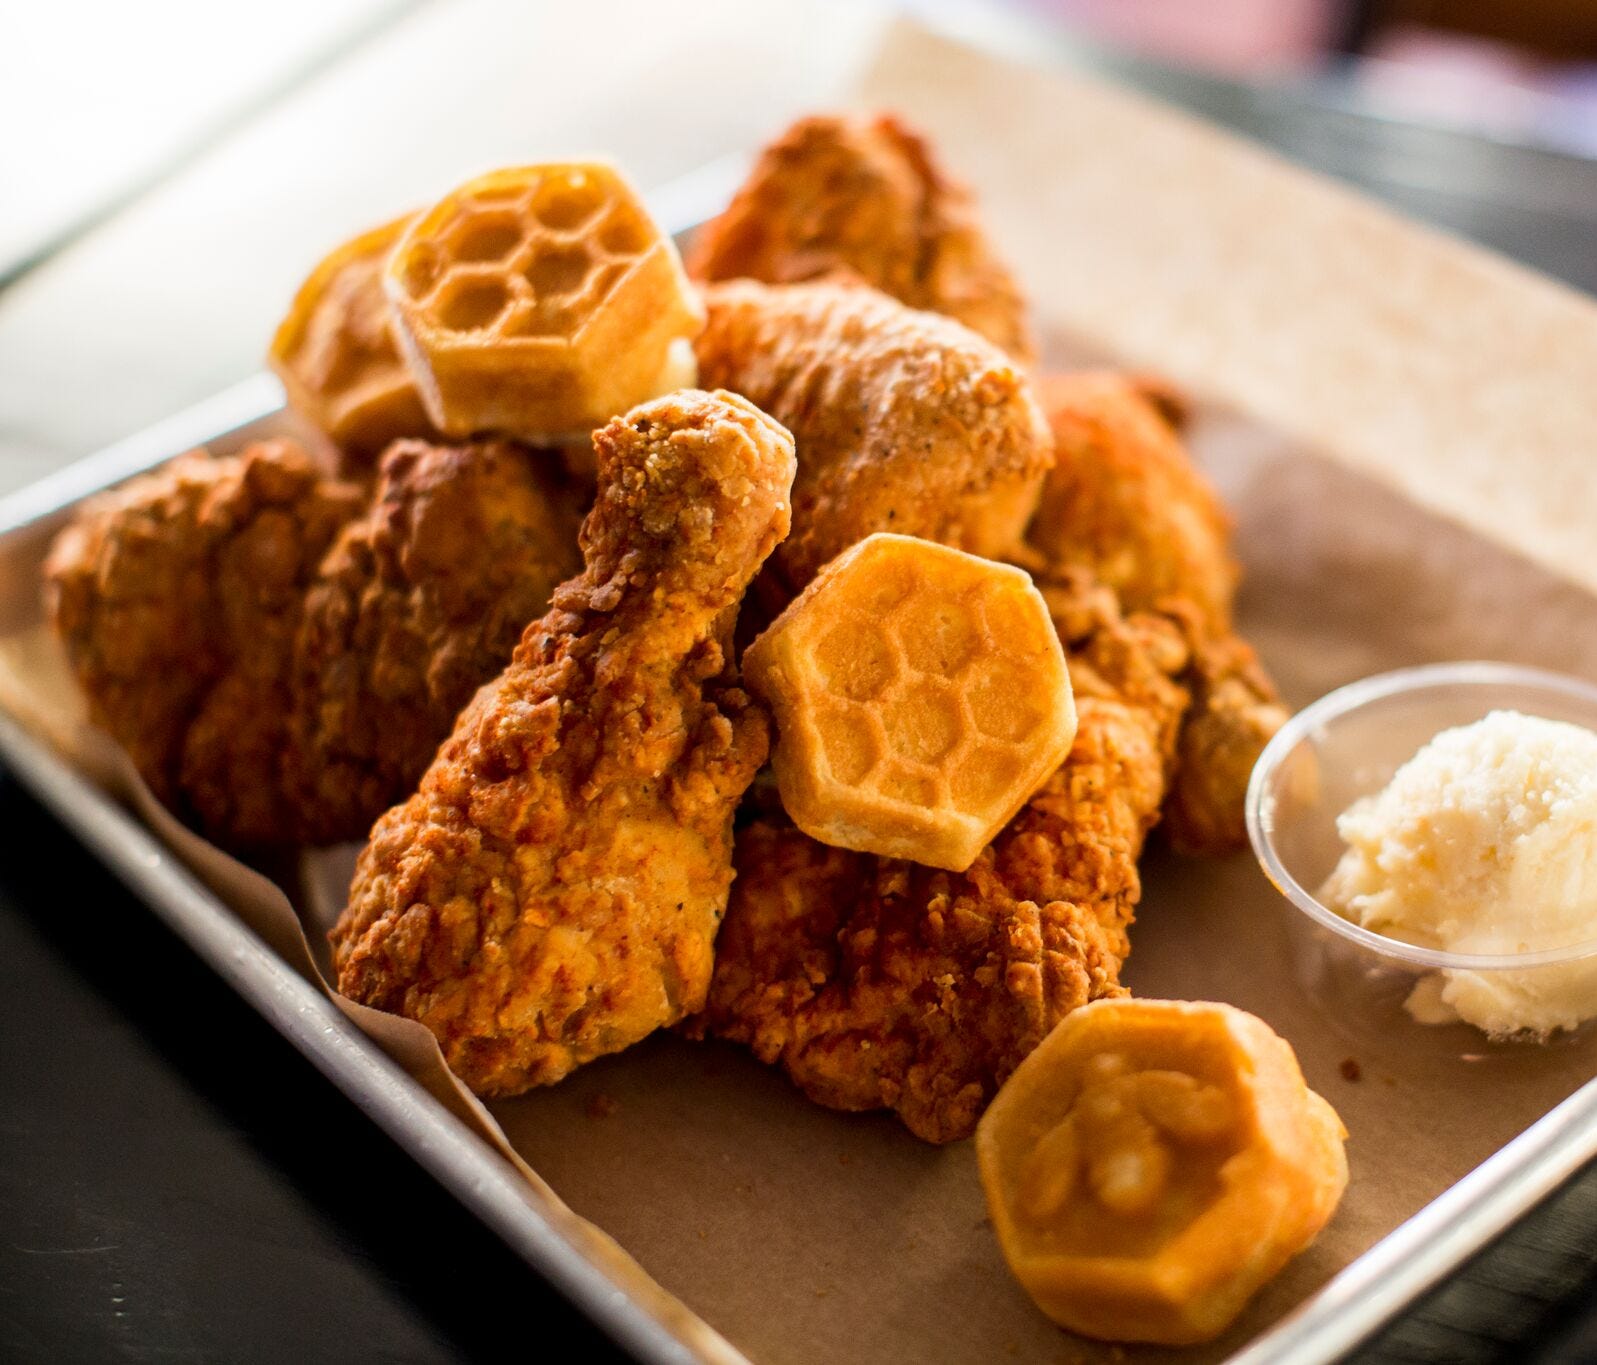 An order of the namesake fried chicken is served with mini-corn muffins and honey butter.